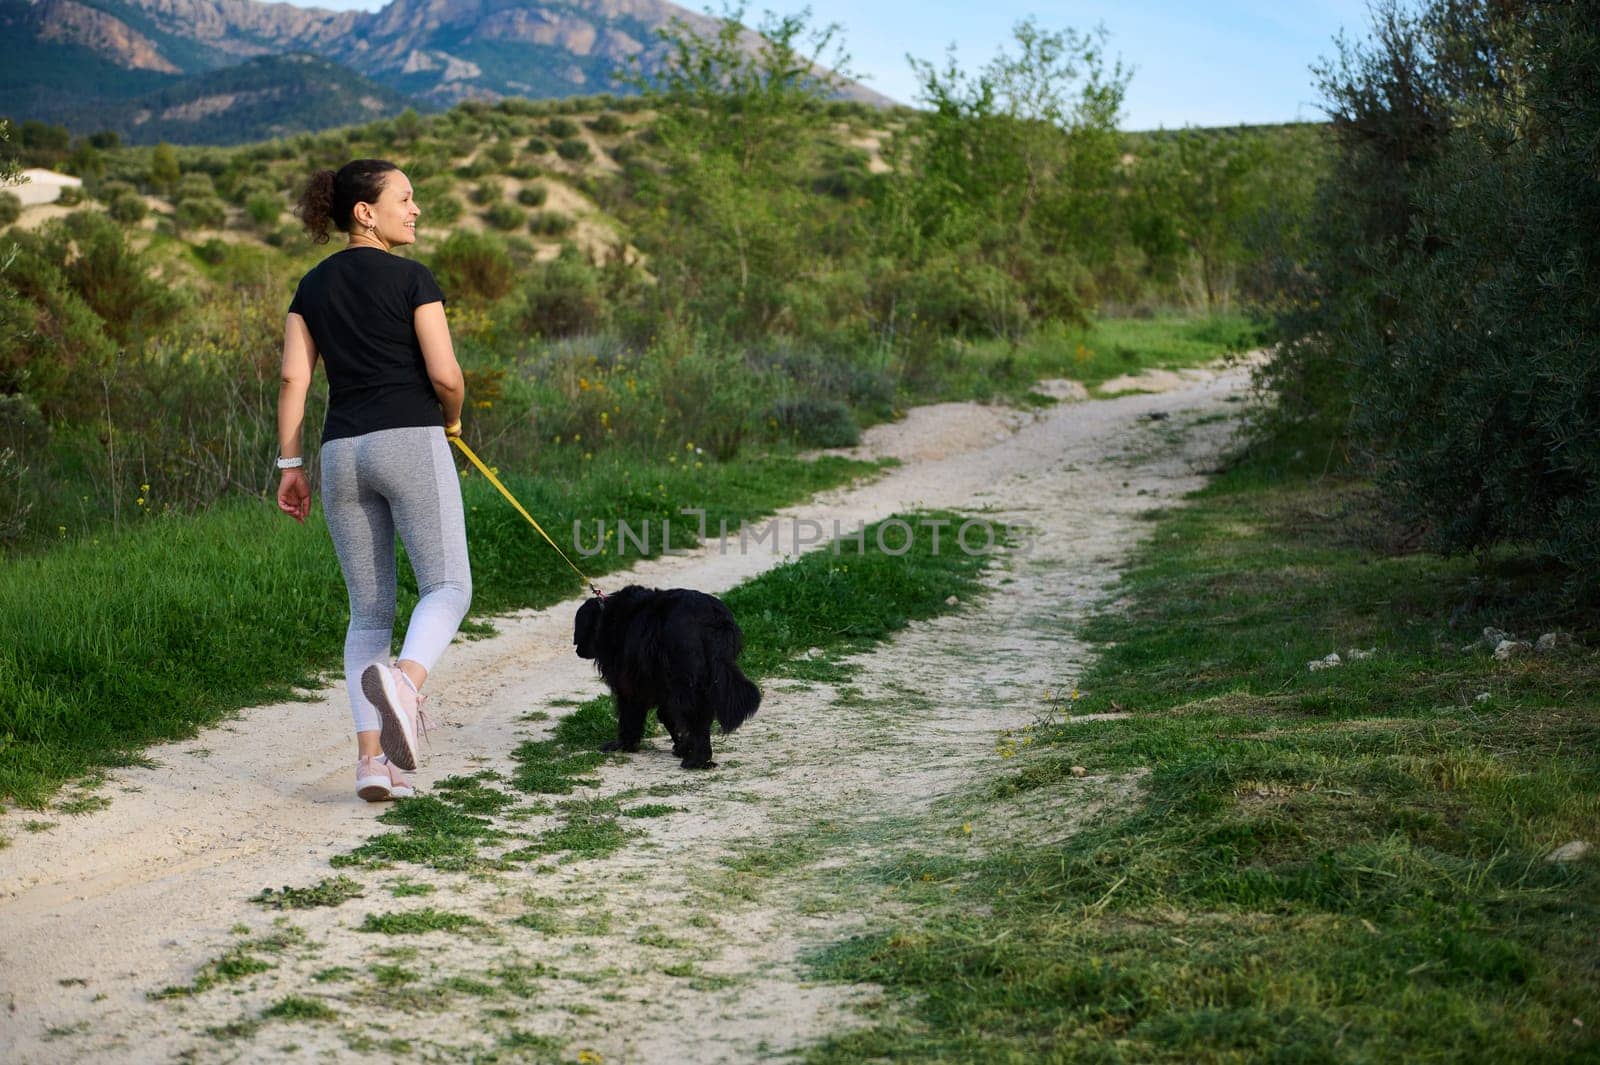 Full size shot of a happy woman smiling looking away, walking her dog in mountains outdoors. People, nature and playing pets concept. Rear view